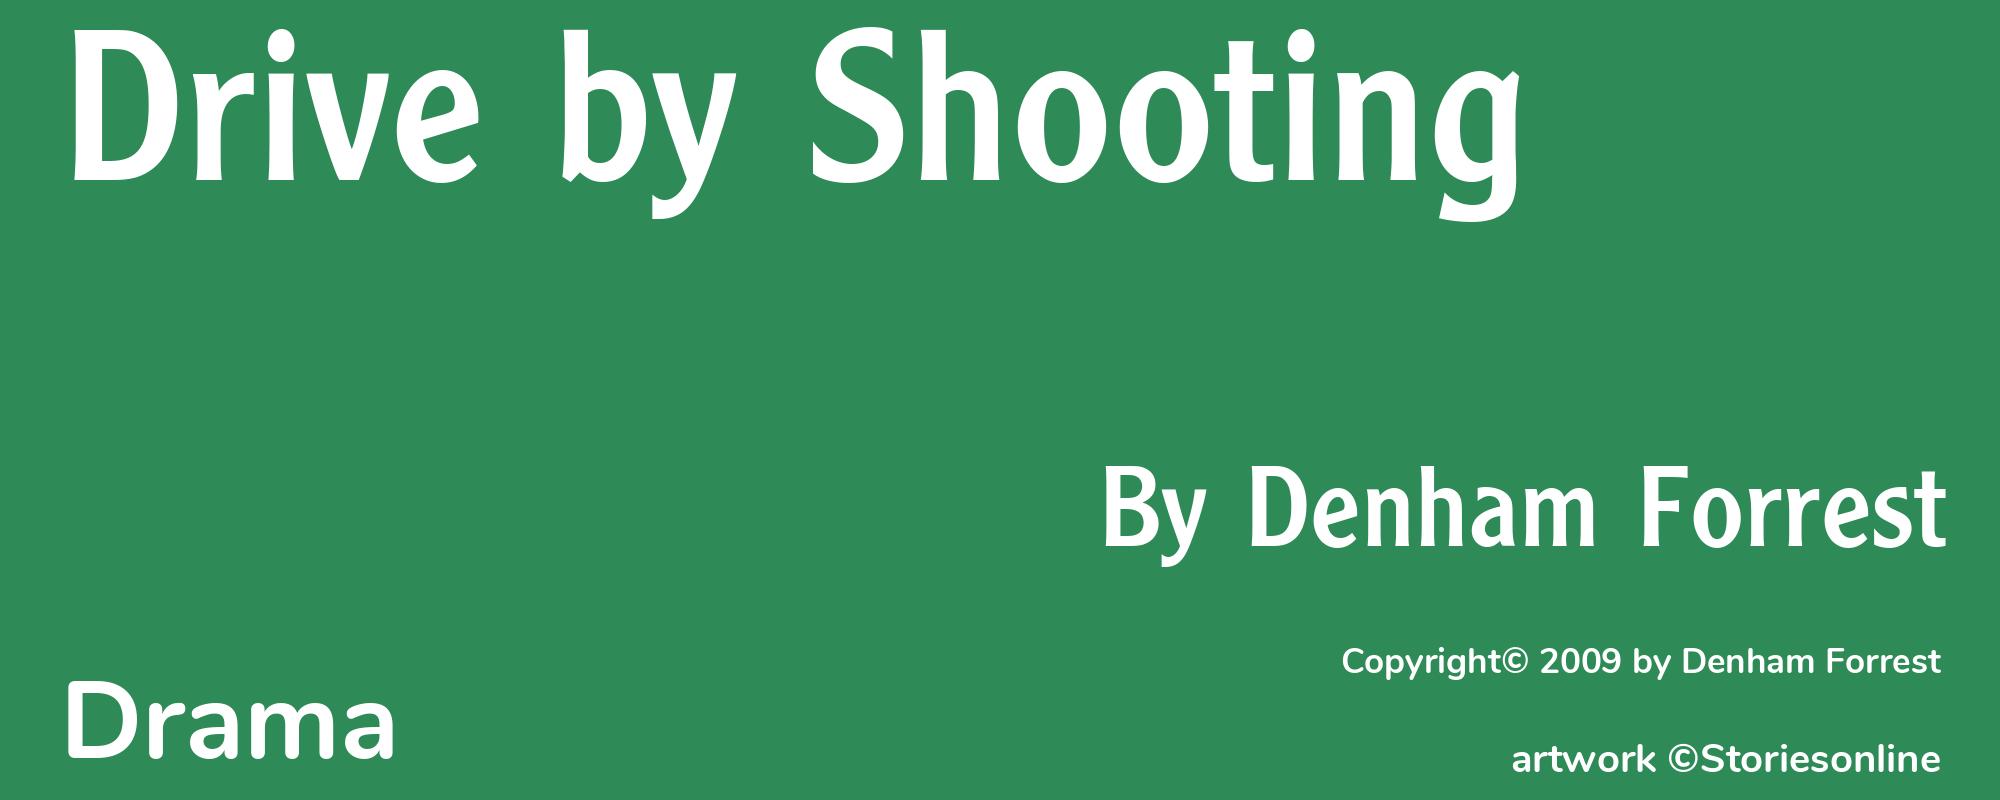 Drive by Shooting - Cover